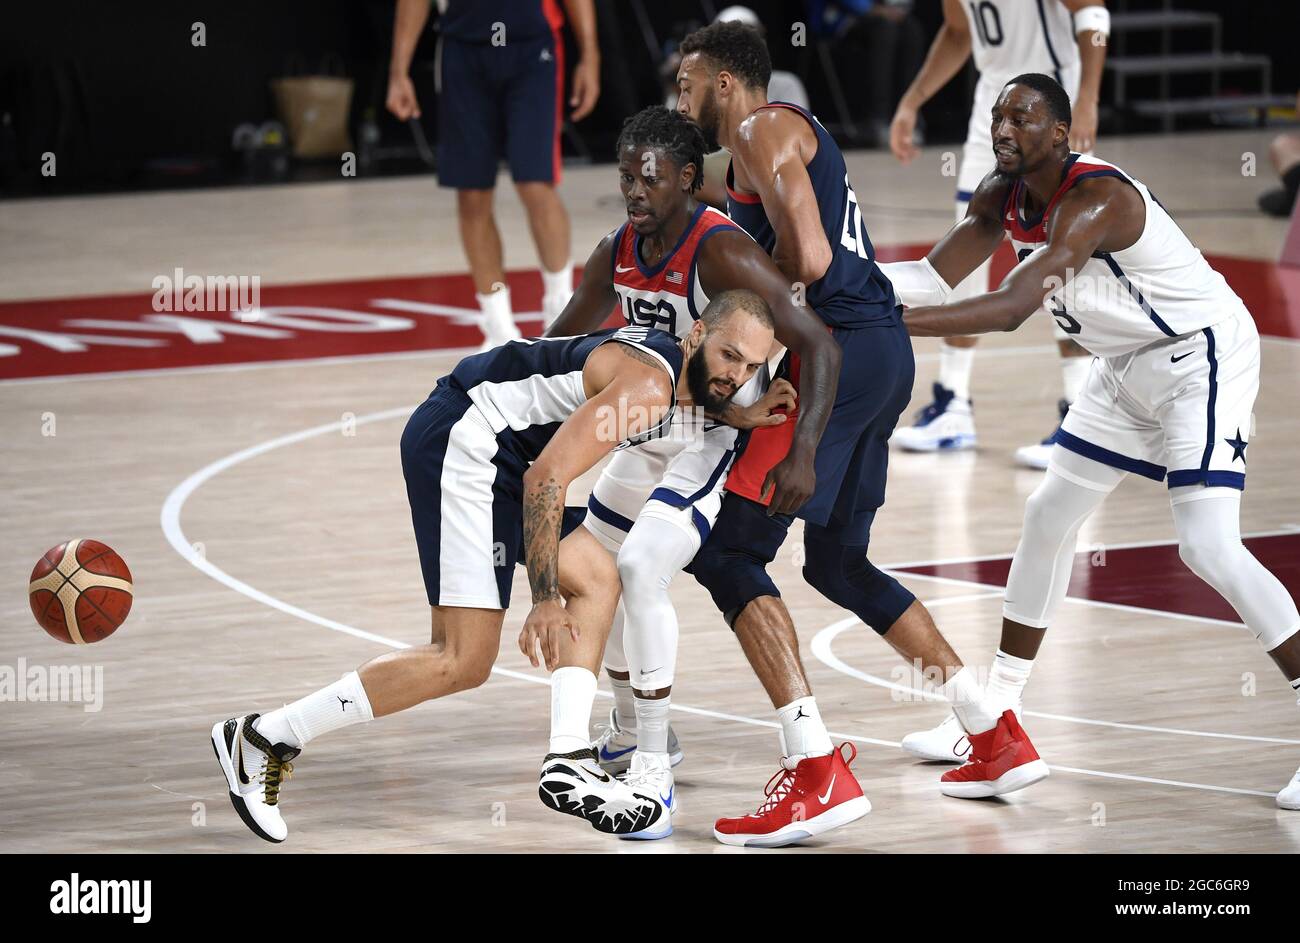 Tokyo, Japan. 07th Aug, 2021. The ball is loose on the court as France's Evan Fournier (L) is defended by United States' Jrue Holiday in Men's Basketball final at the Tokyo 2020 Olympics, Saturday, August 7, 2021, in Tokyo, Japan. USA defeated France, winning the Gold Medal, 87-82. Photo by Mike Theiler/UPI Credit: UPI/Alamy Live News Stock Photo